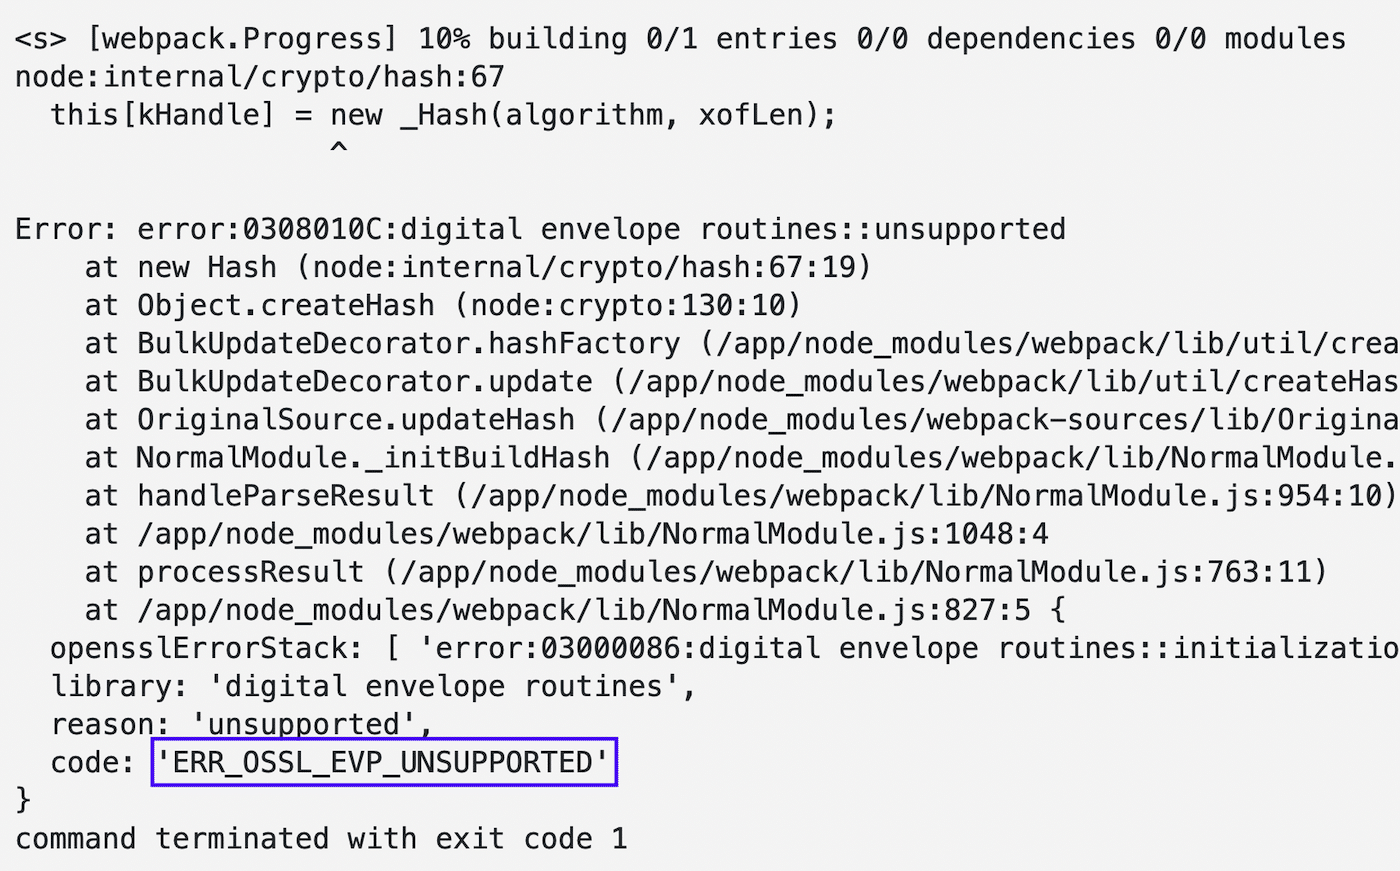 An example of the err_ossl_evp_unsupported error